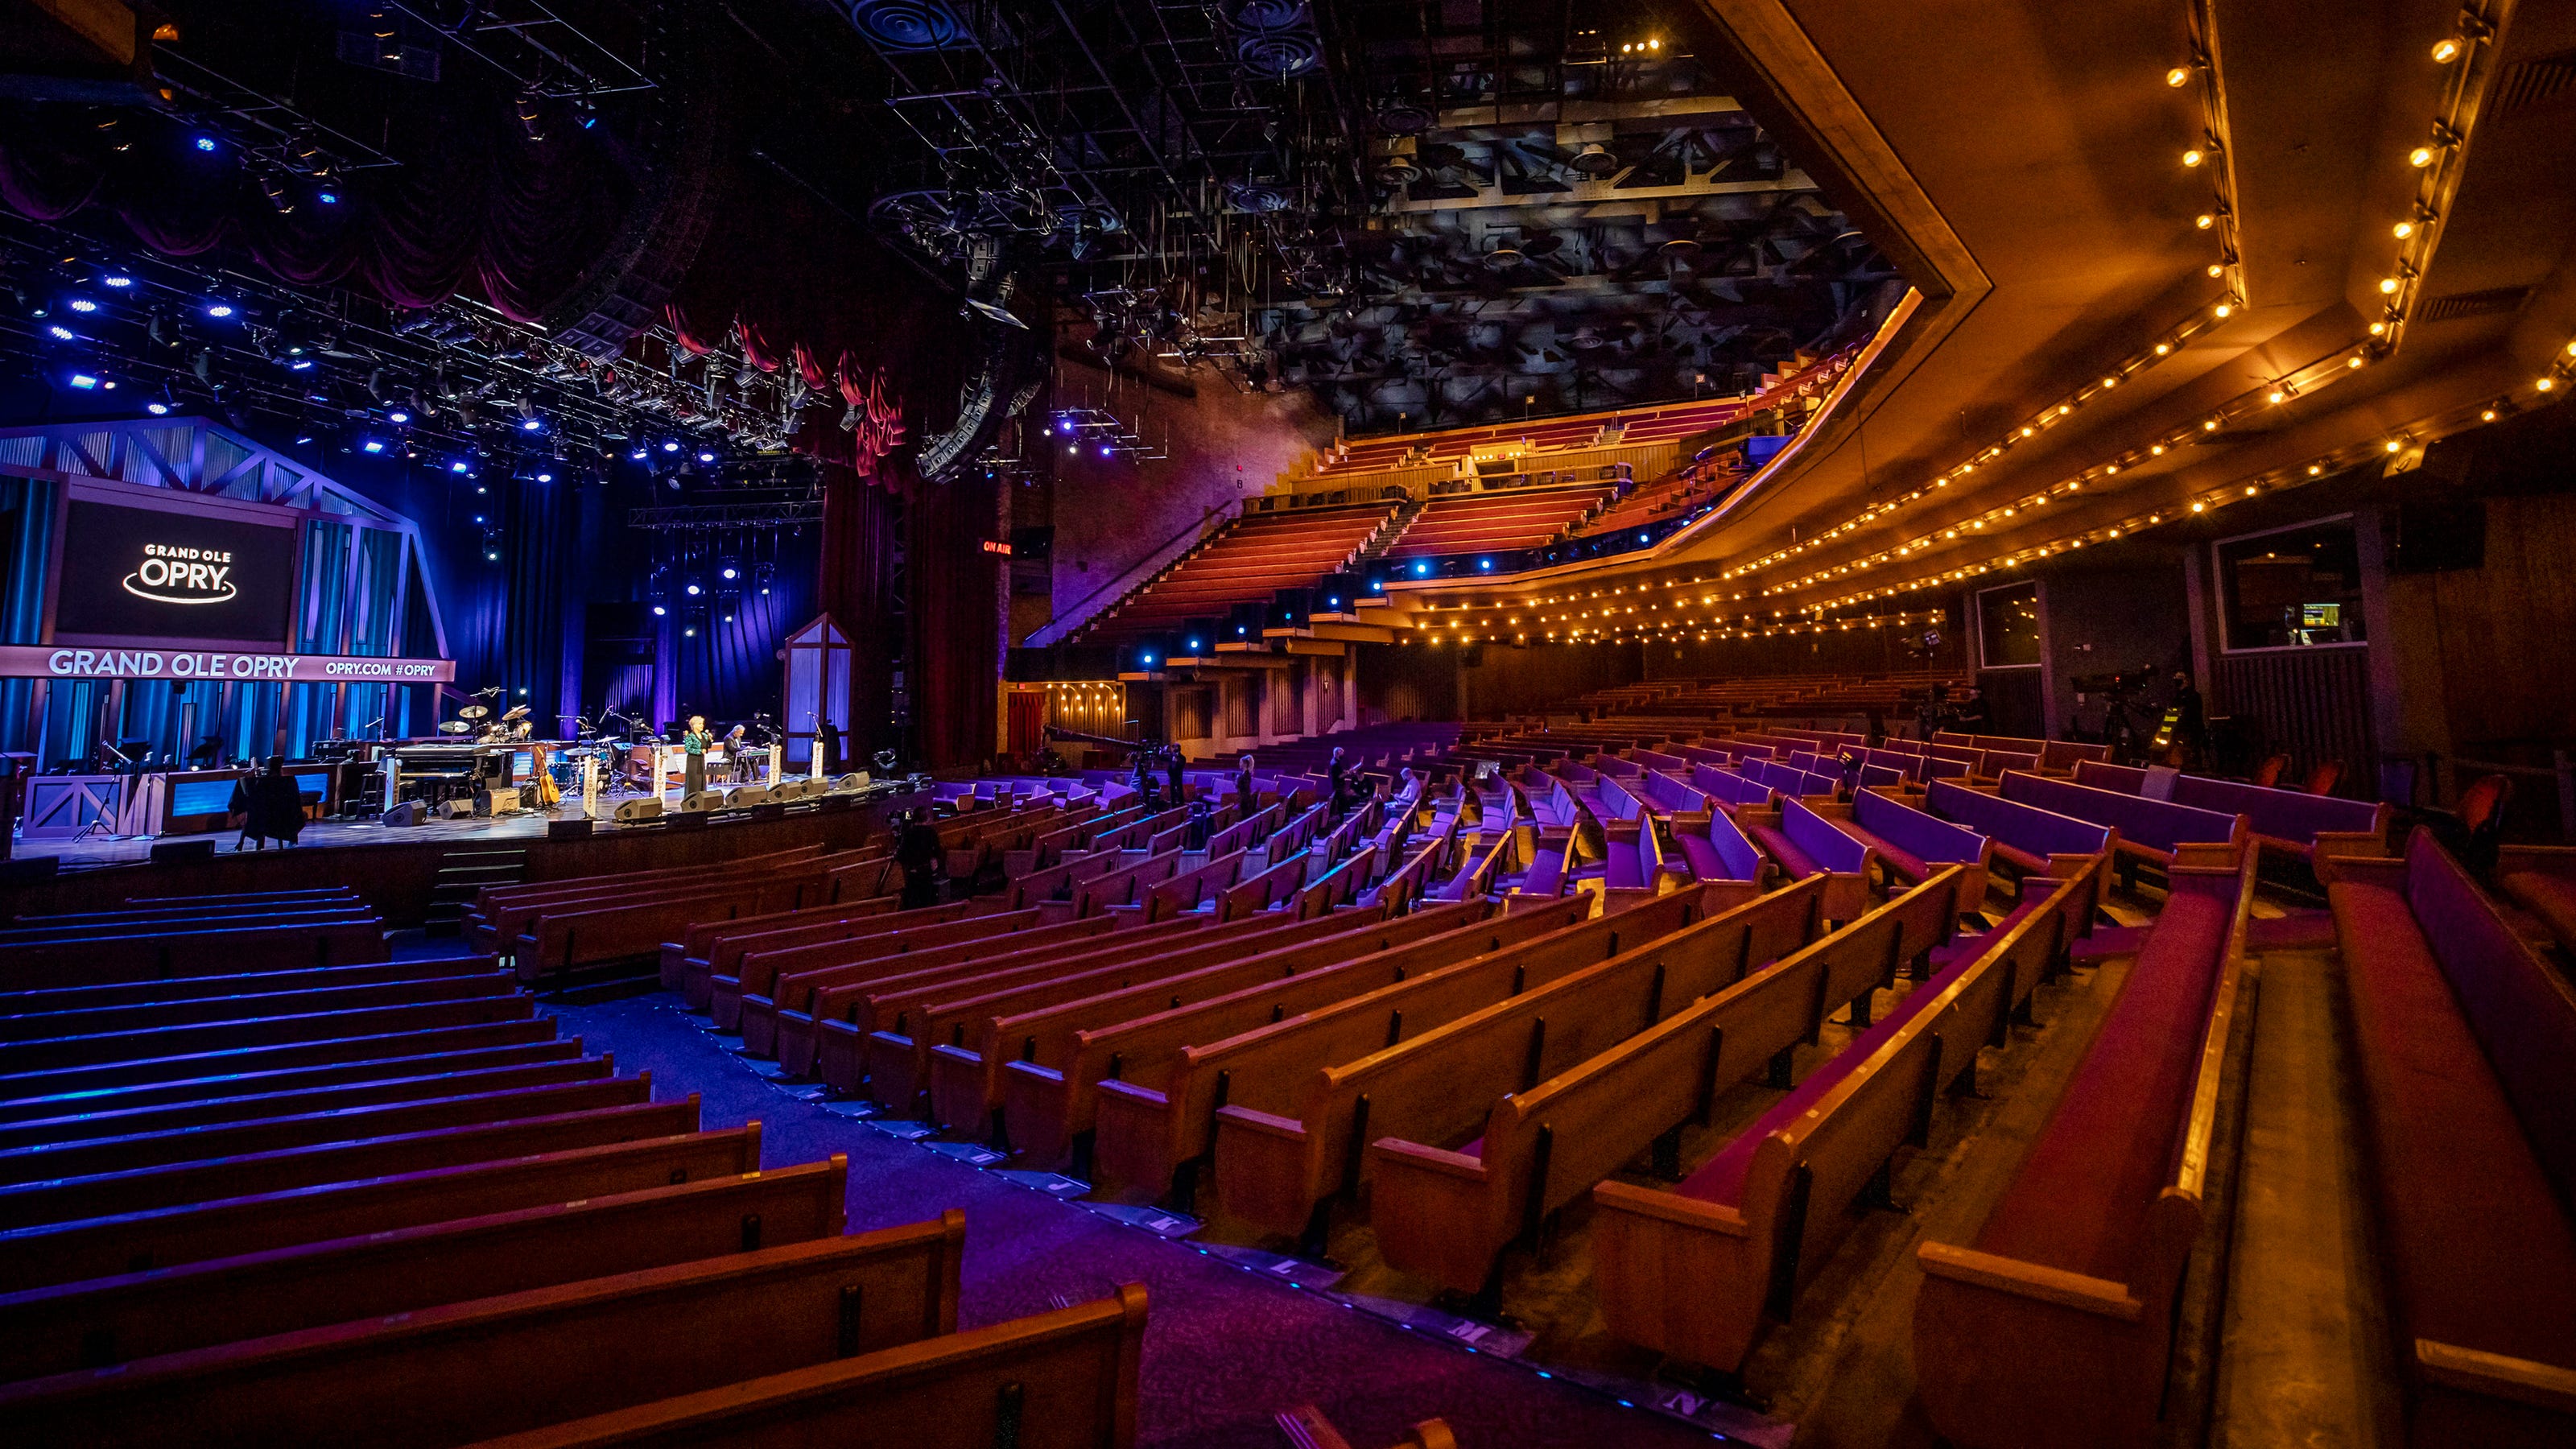 Grand Ole Opry turns 95, reopens to smaller live audiences in pandemic